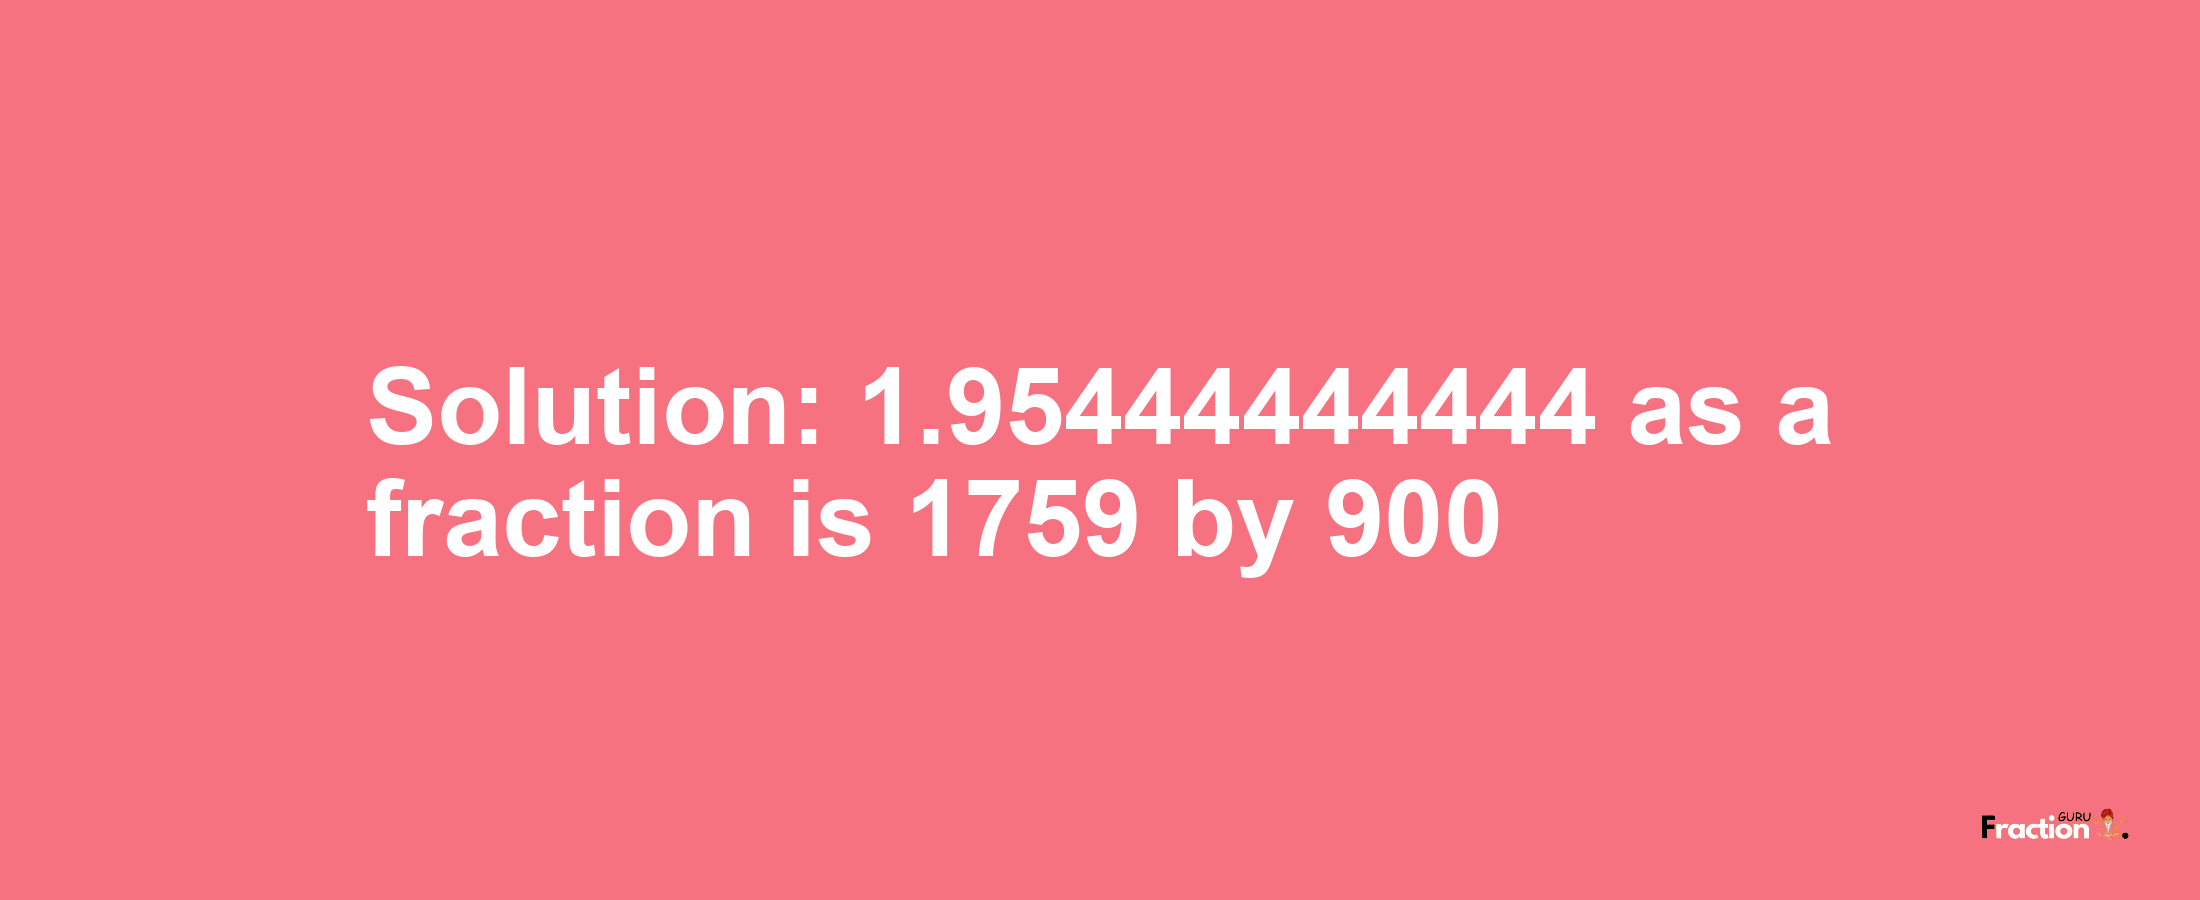 Solution:1.95444444444 as a fraction is 1759/900